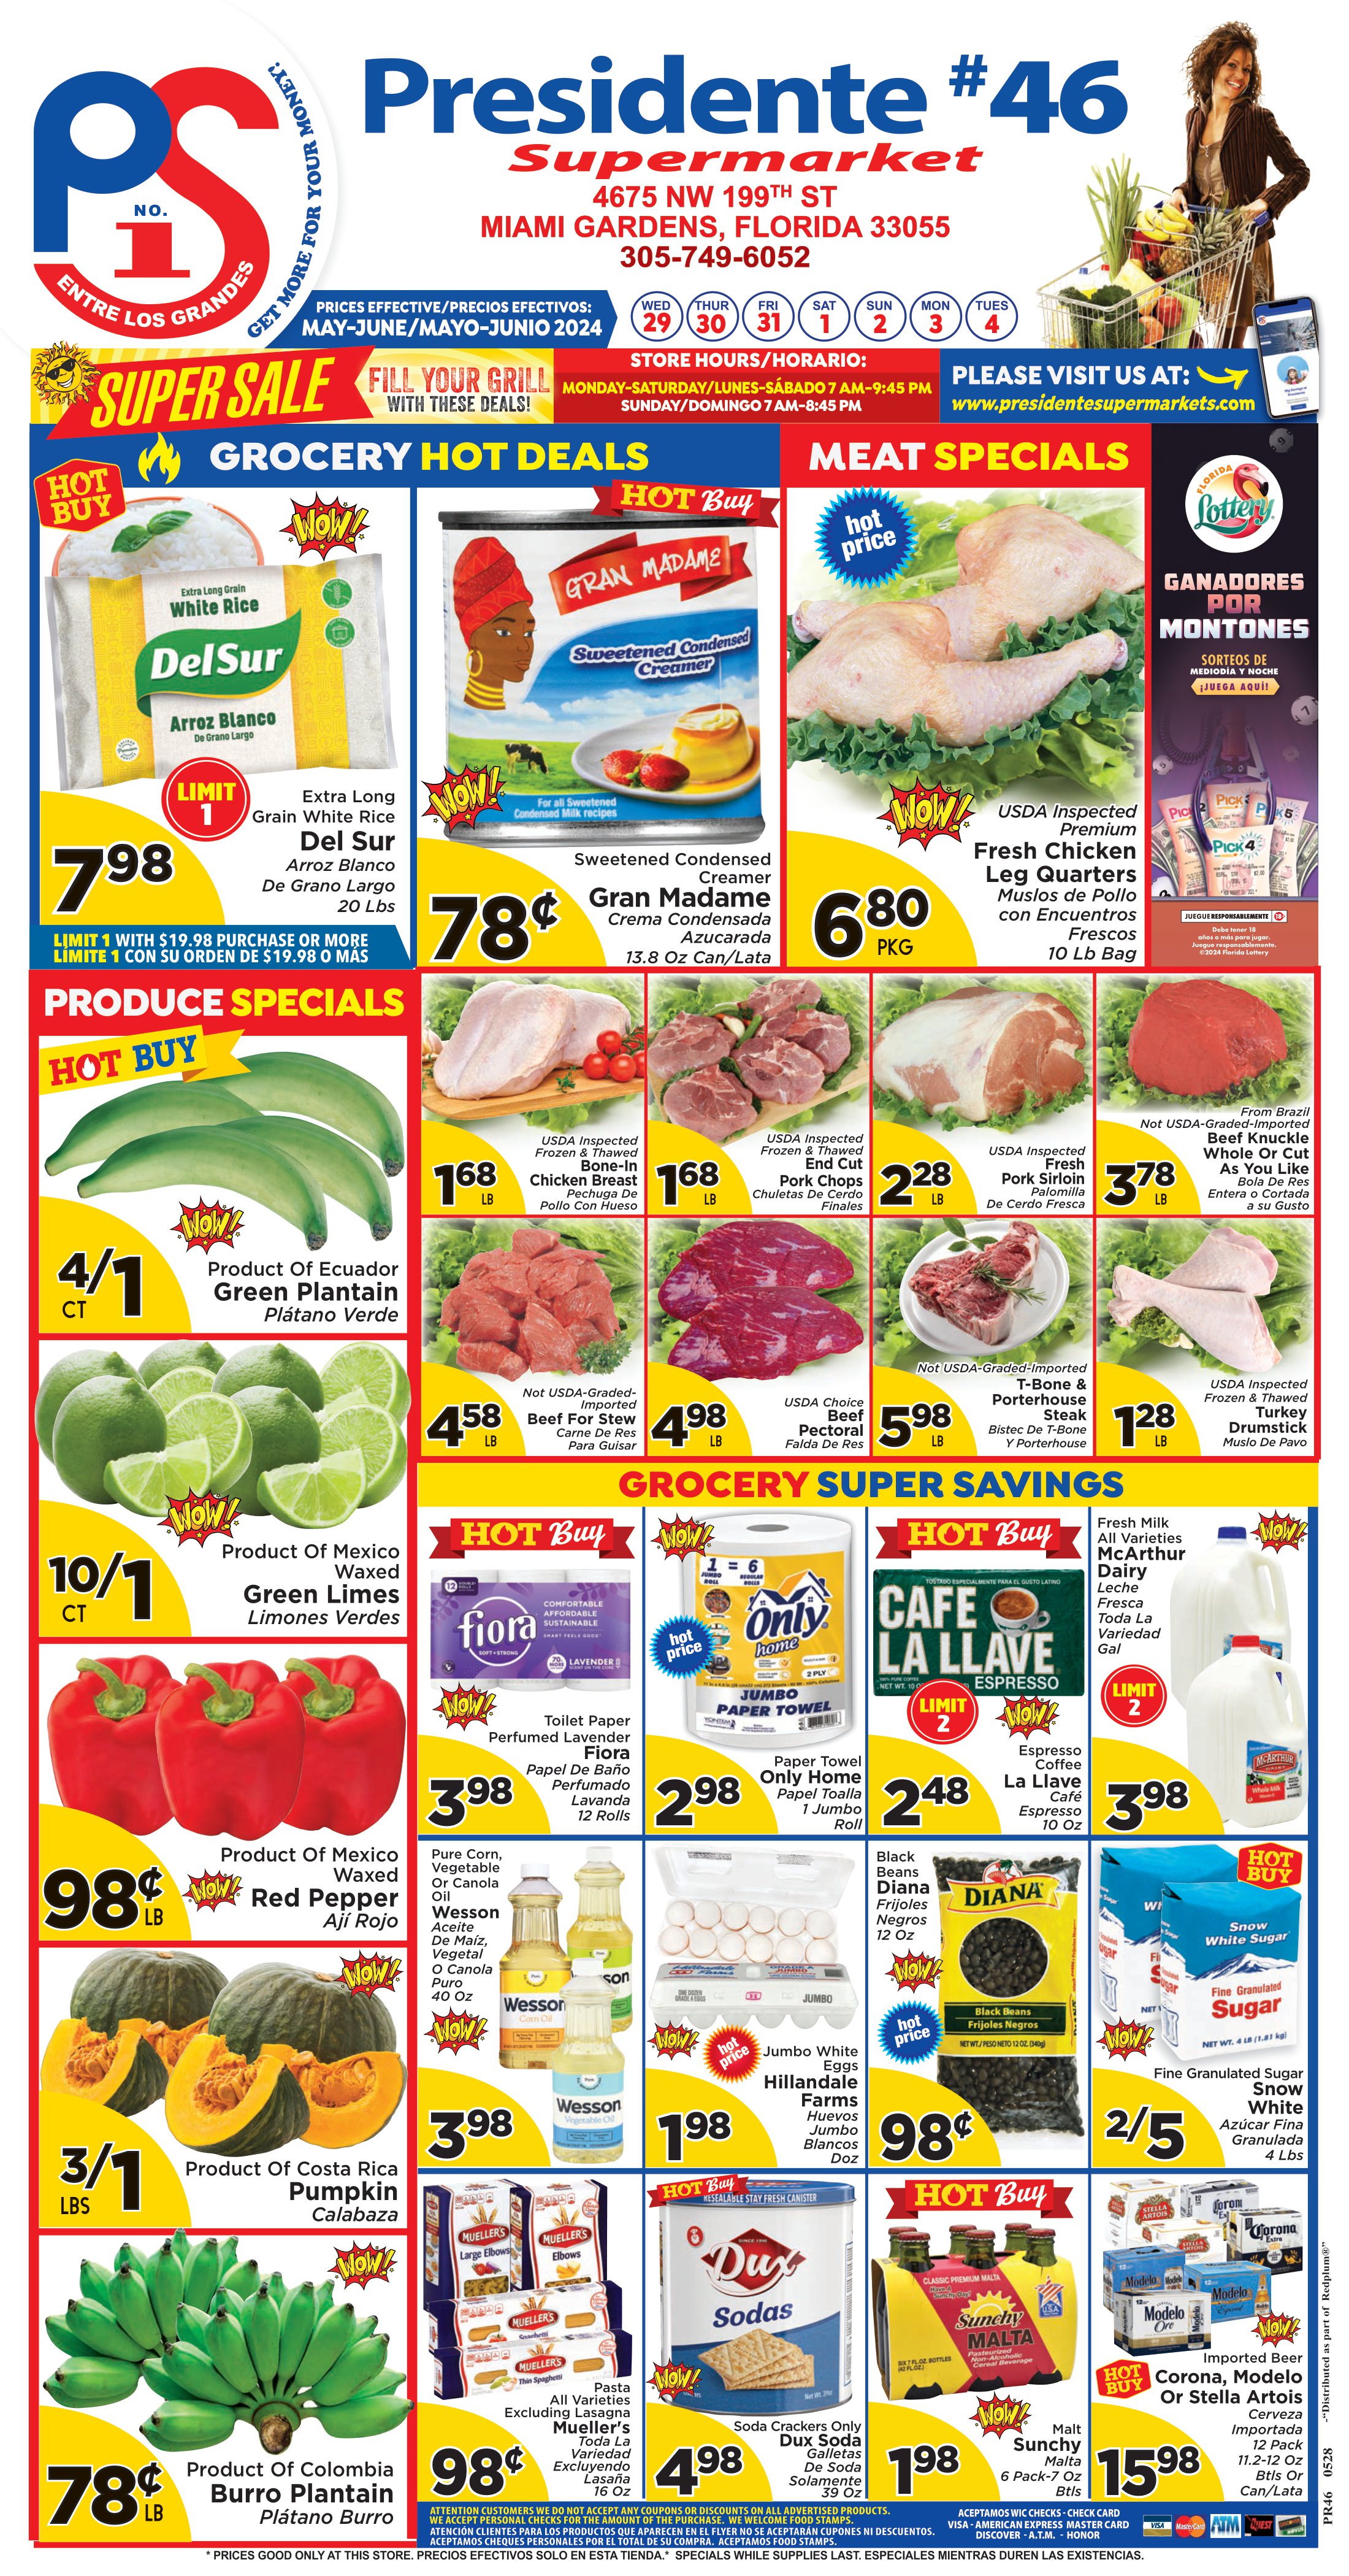 Presidente Supermarket - Weekly Promo for Store 46 Page 1